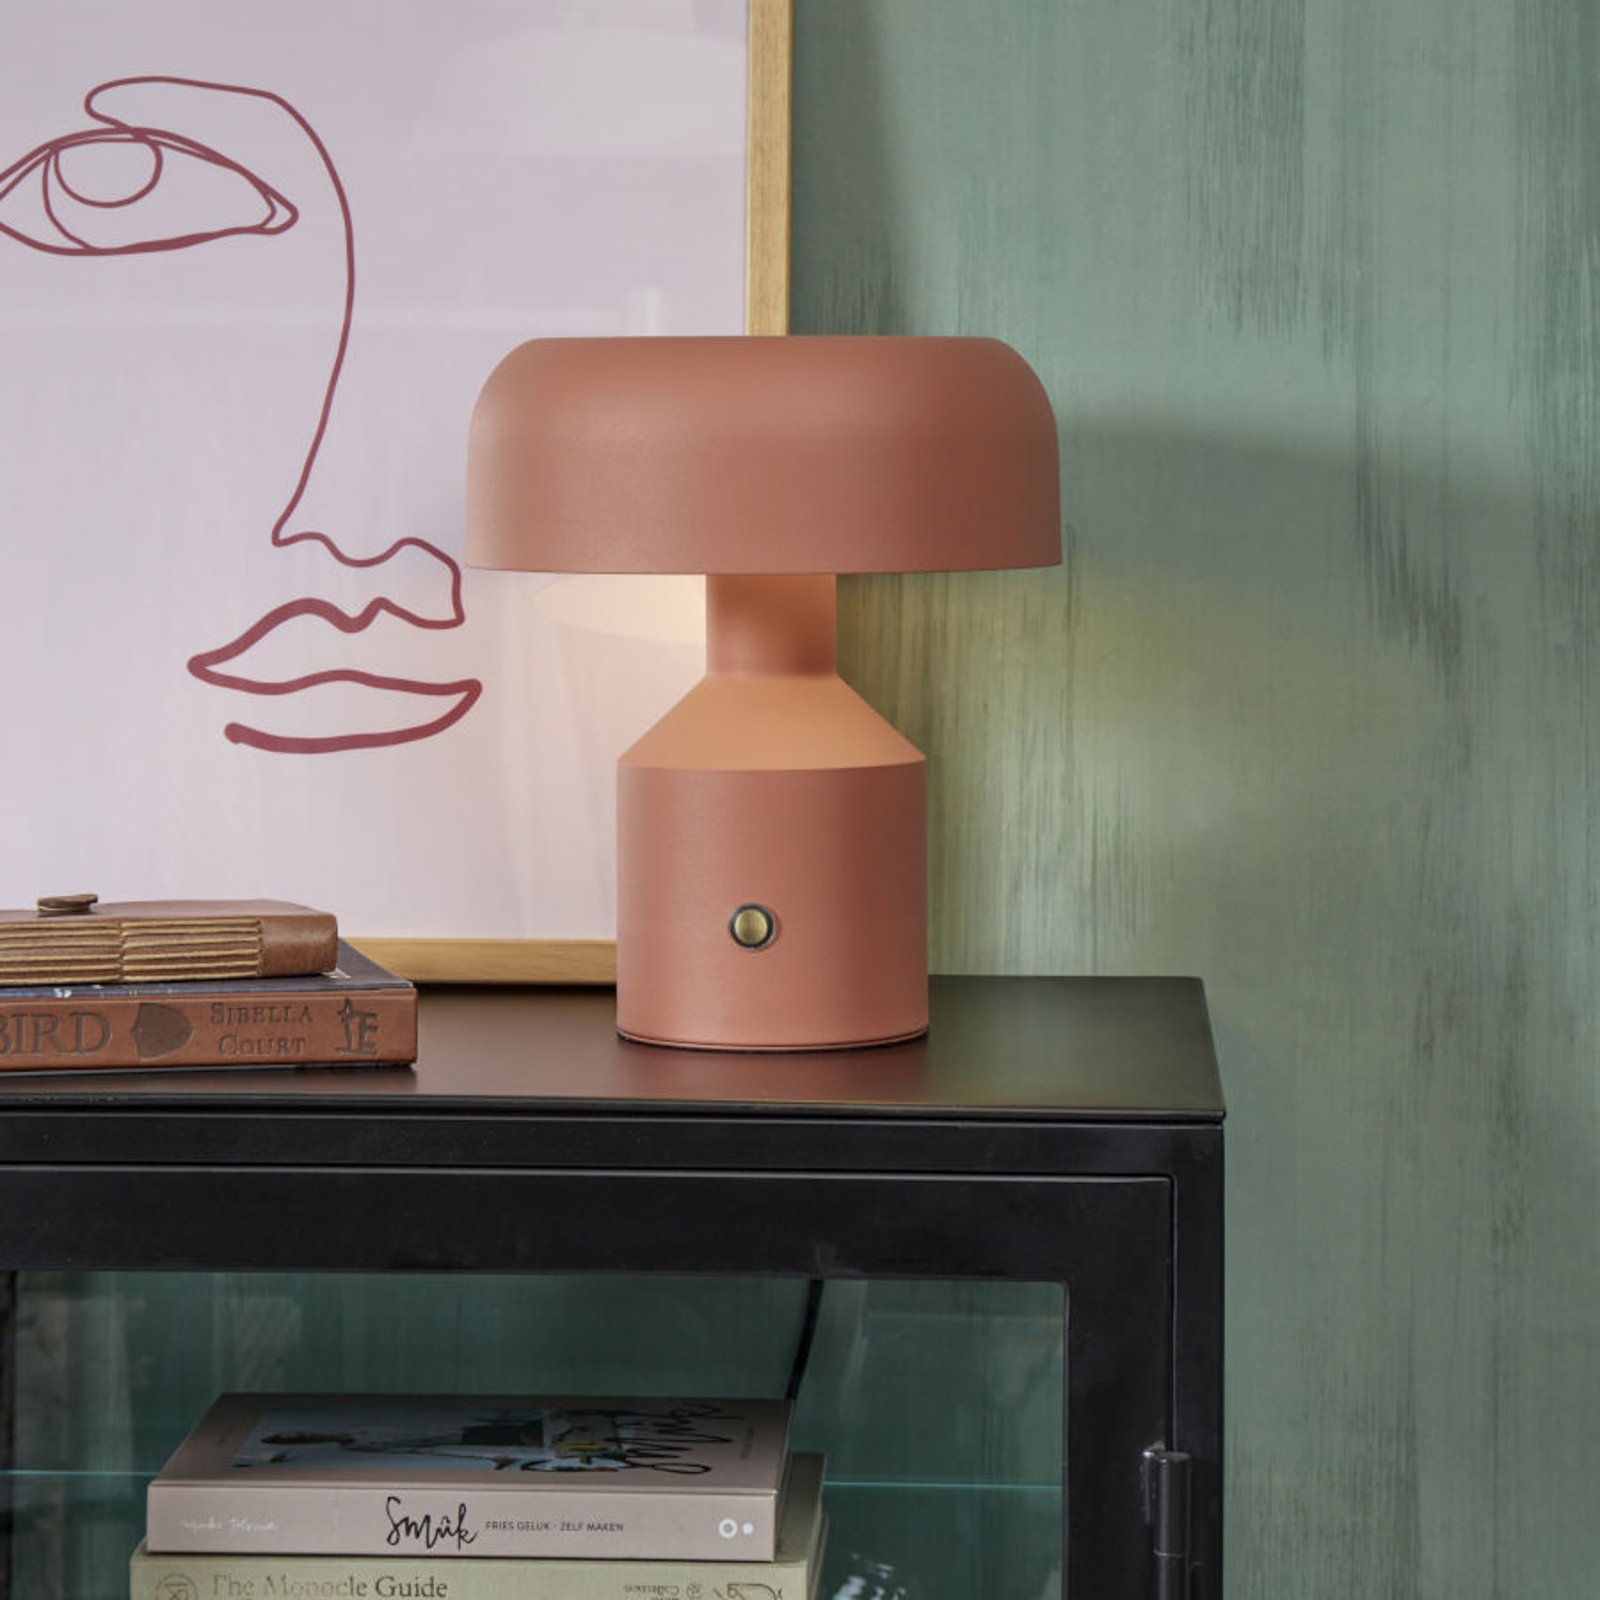 It’s about RoMi Porto table lamp, terracotta